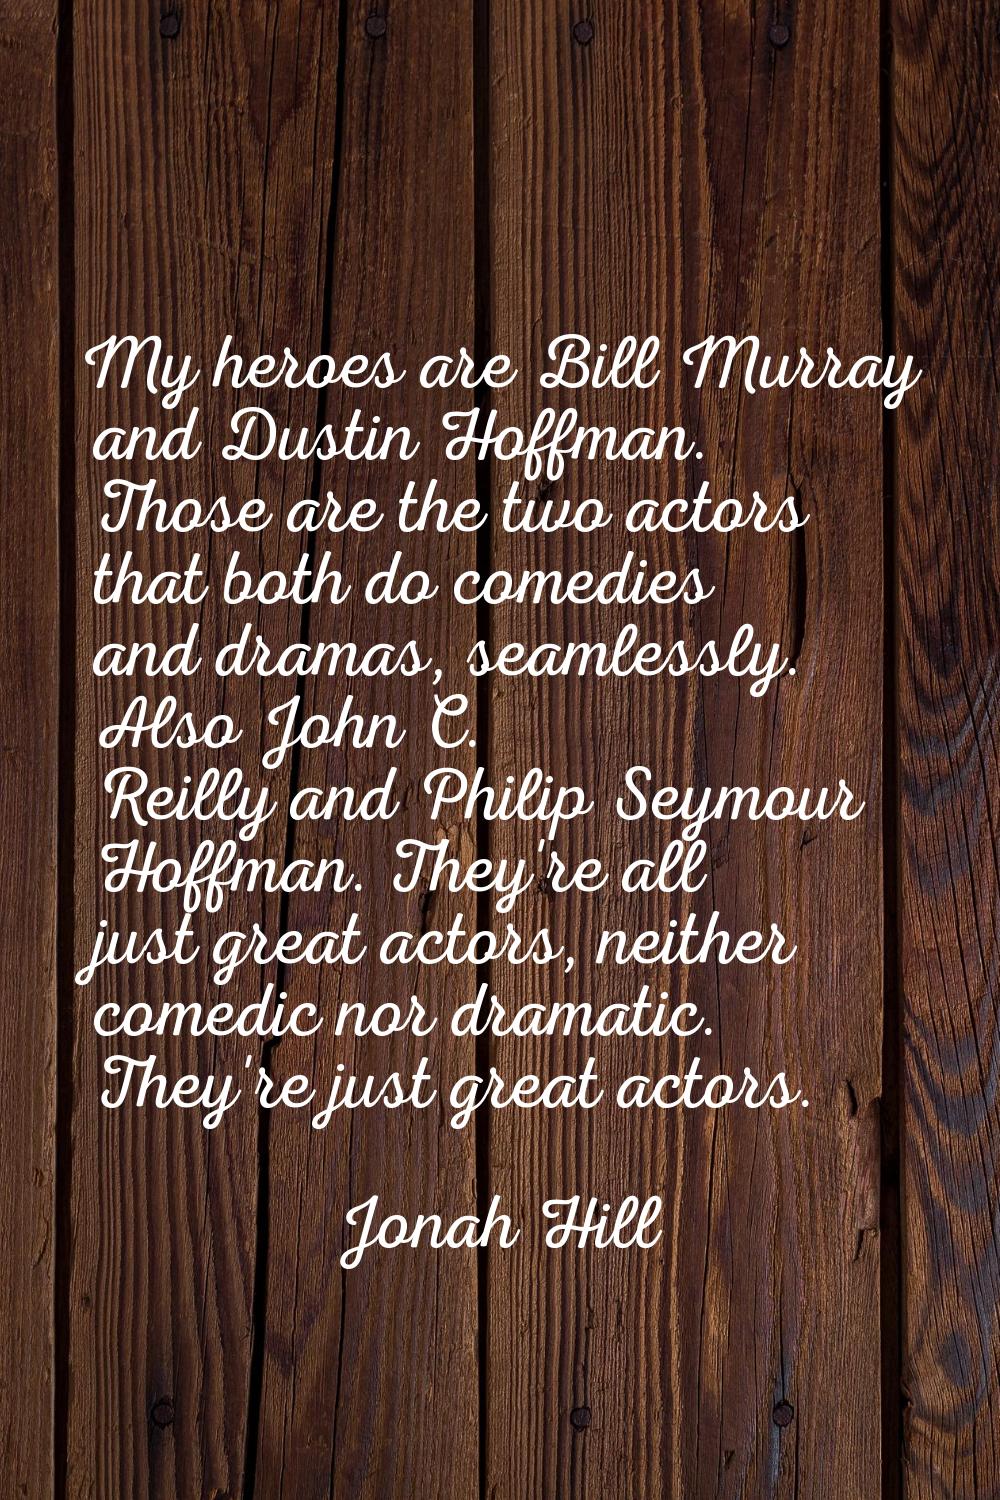 My heroes are Bill Murray and Dustin Hoffman. Those are the two actors that both do comedies and dr